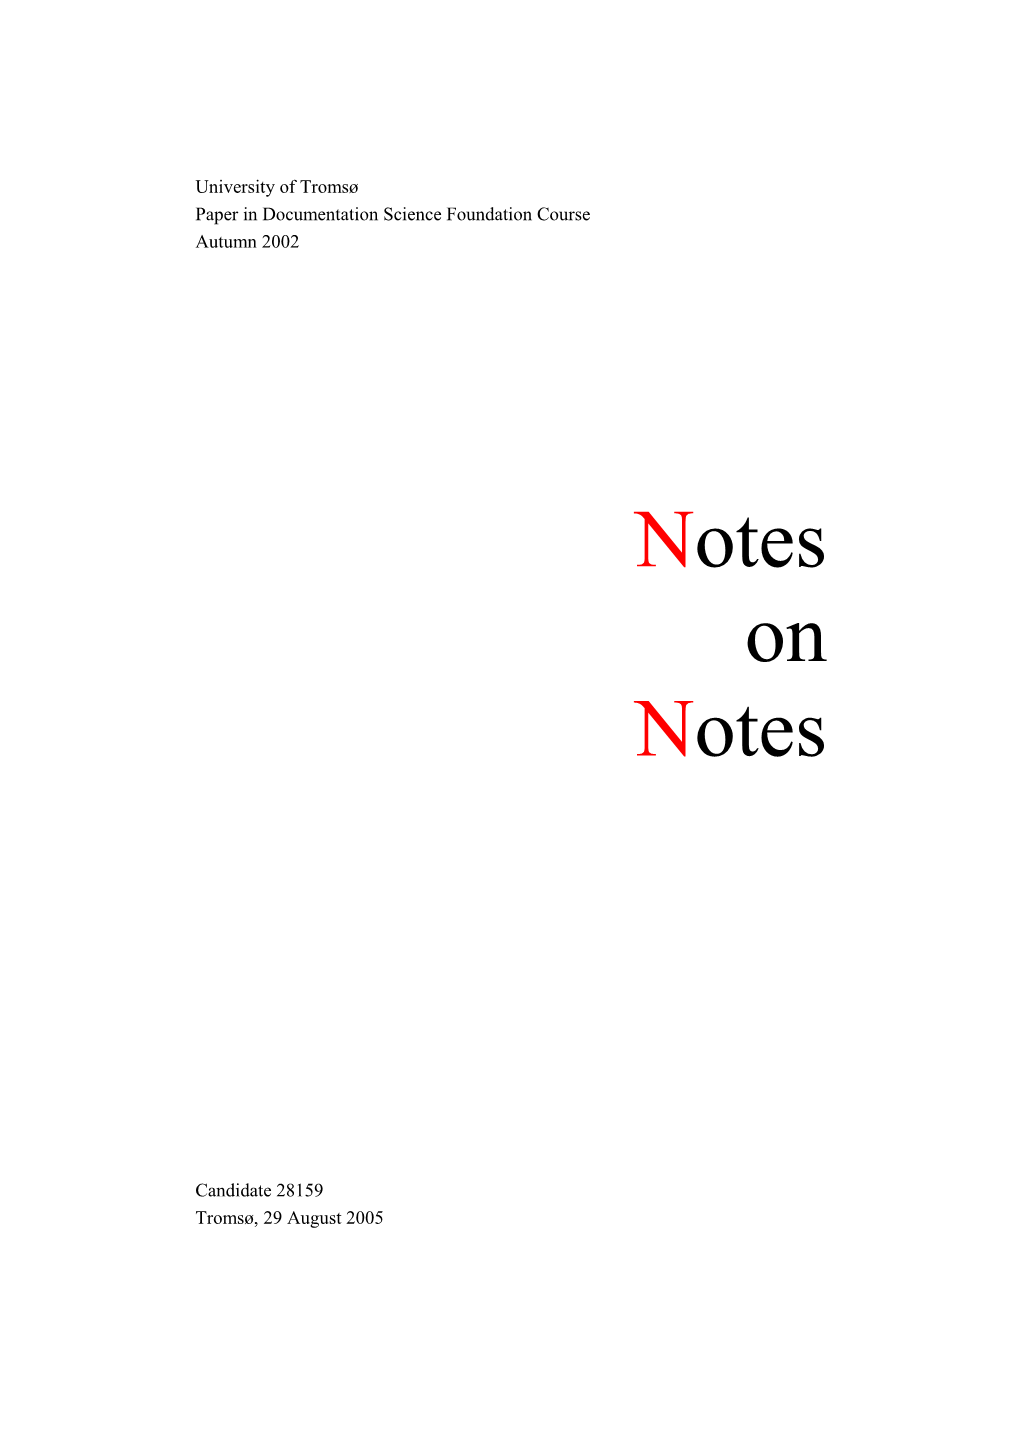 Notes on Notes